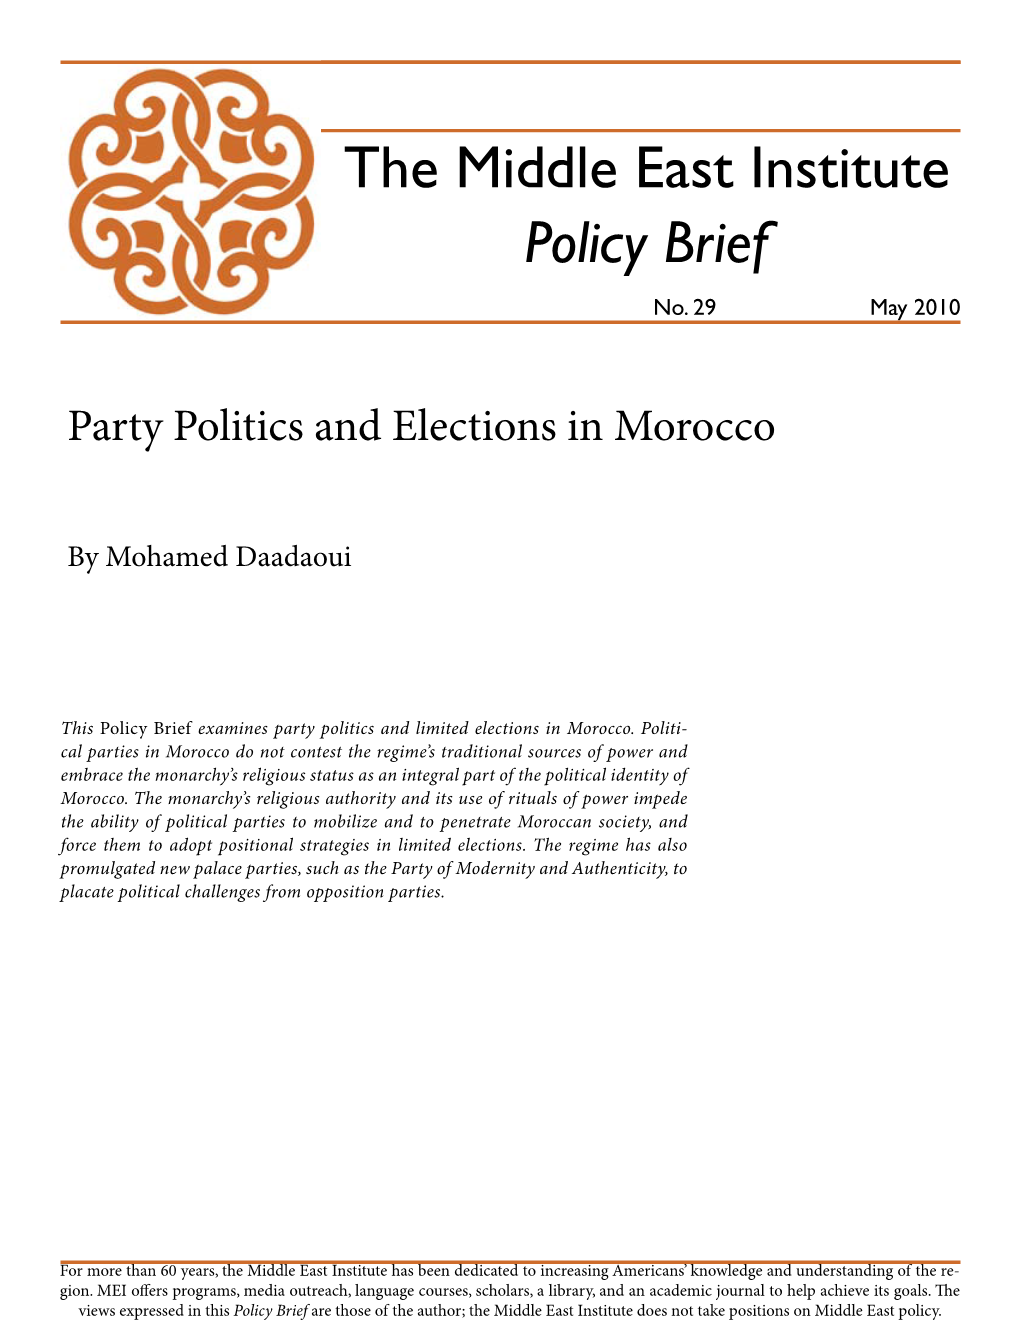 Party Politics and Elections in Morocco